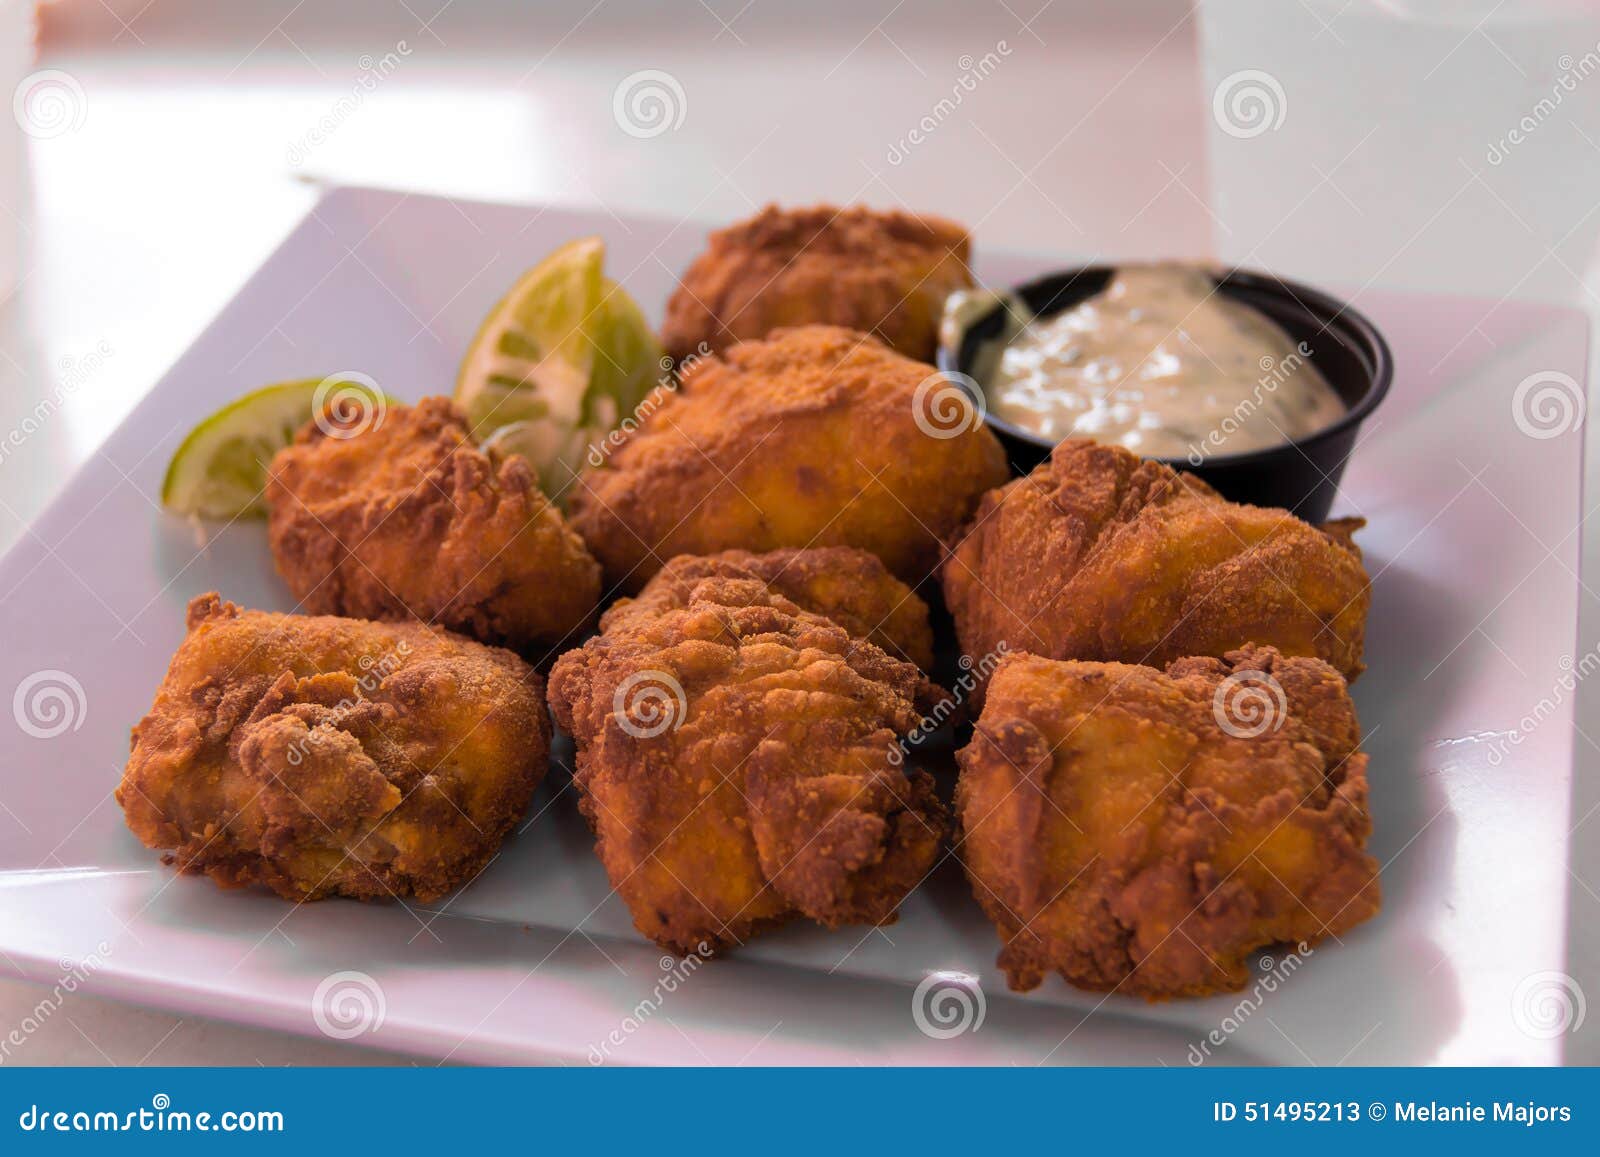 Fried Fish Bites with a Side of Sauce Stock Image - Image of juan